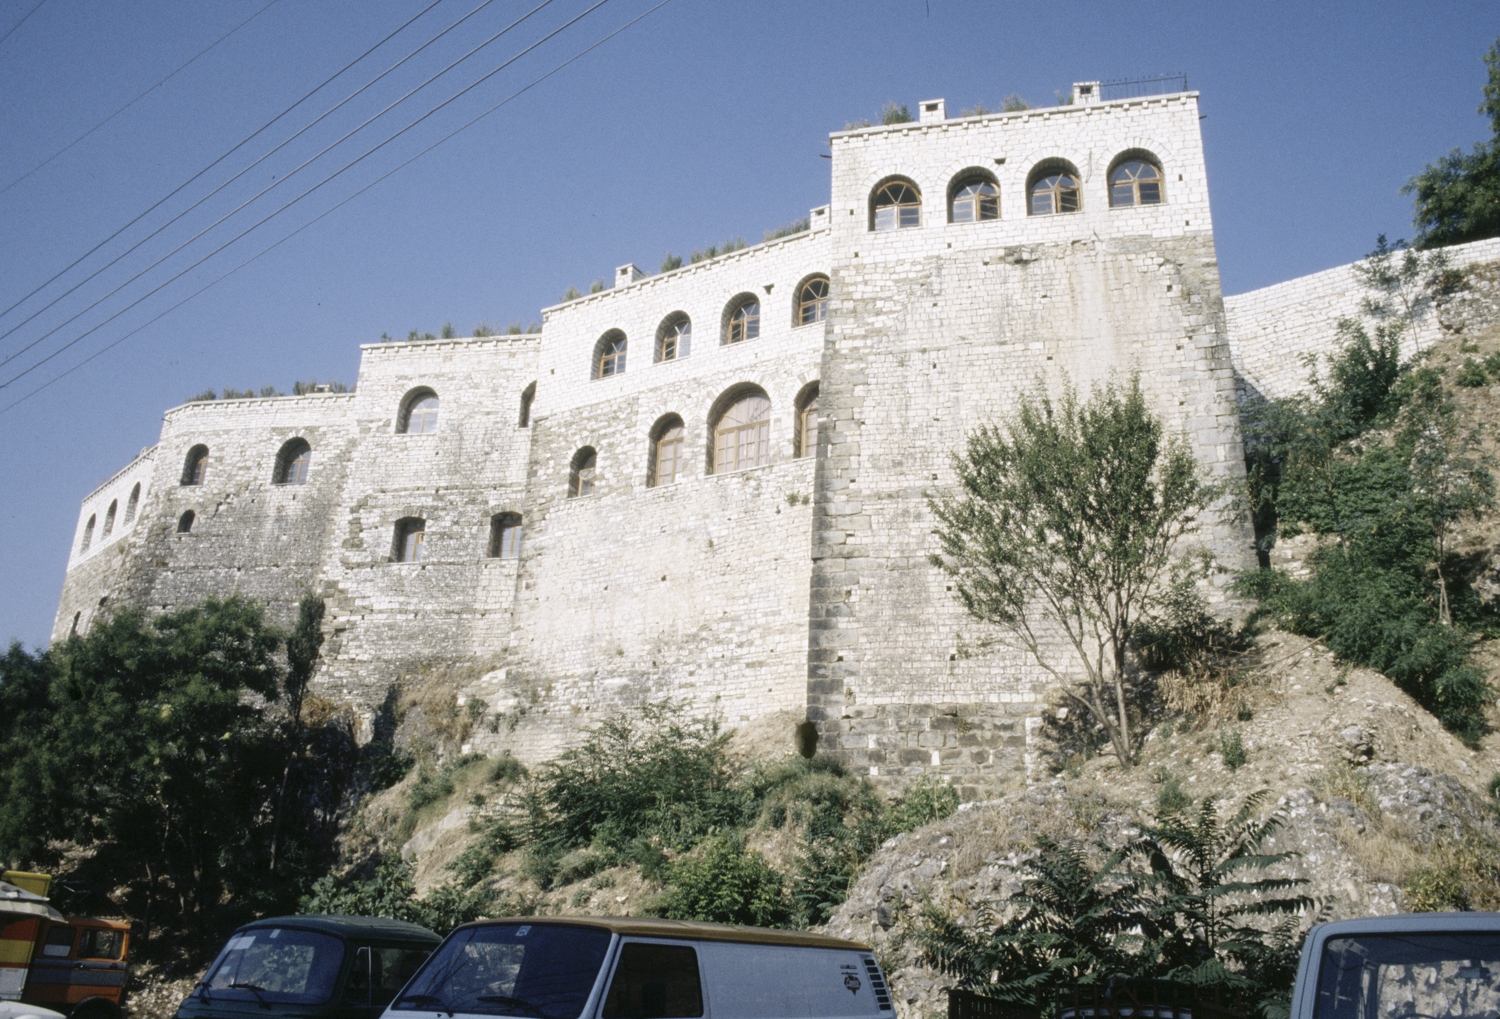 View from below of fortress on hilltop, with restored upper story